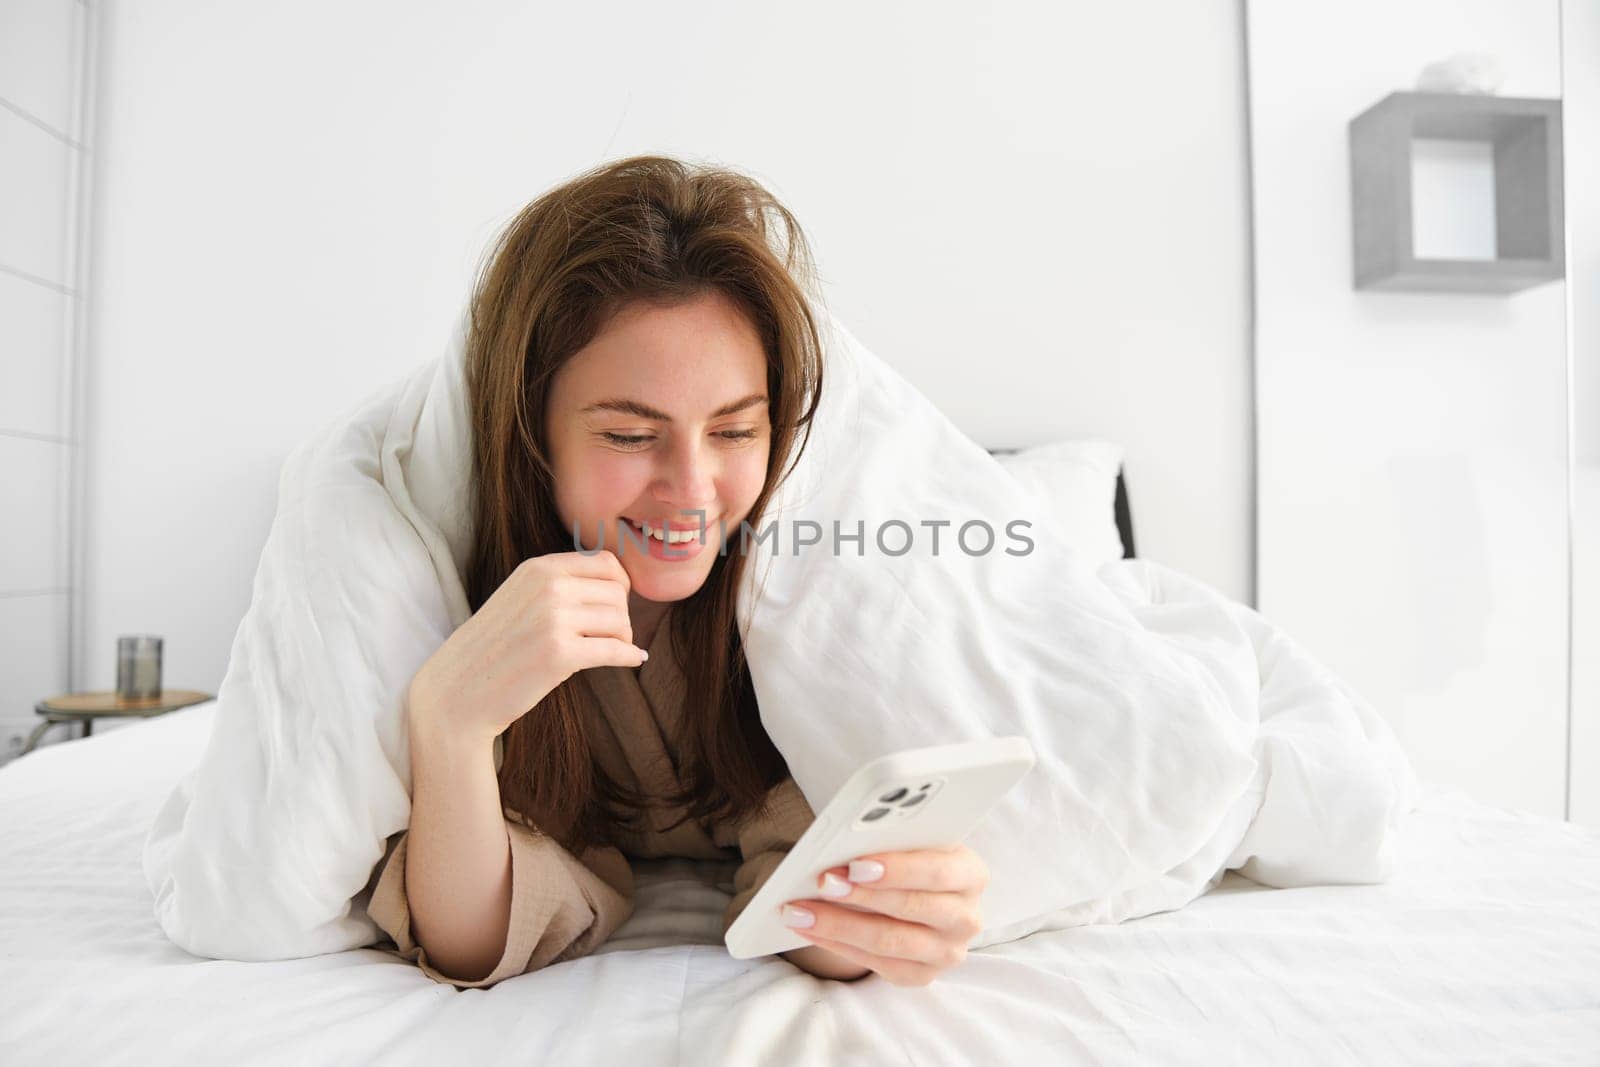 Happy woman in bed, looking at smartphone, online shopping while relaxing in her bedroom under blankets.